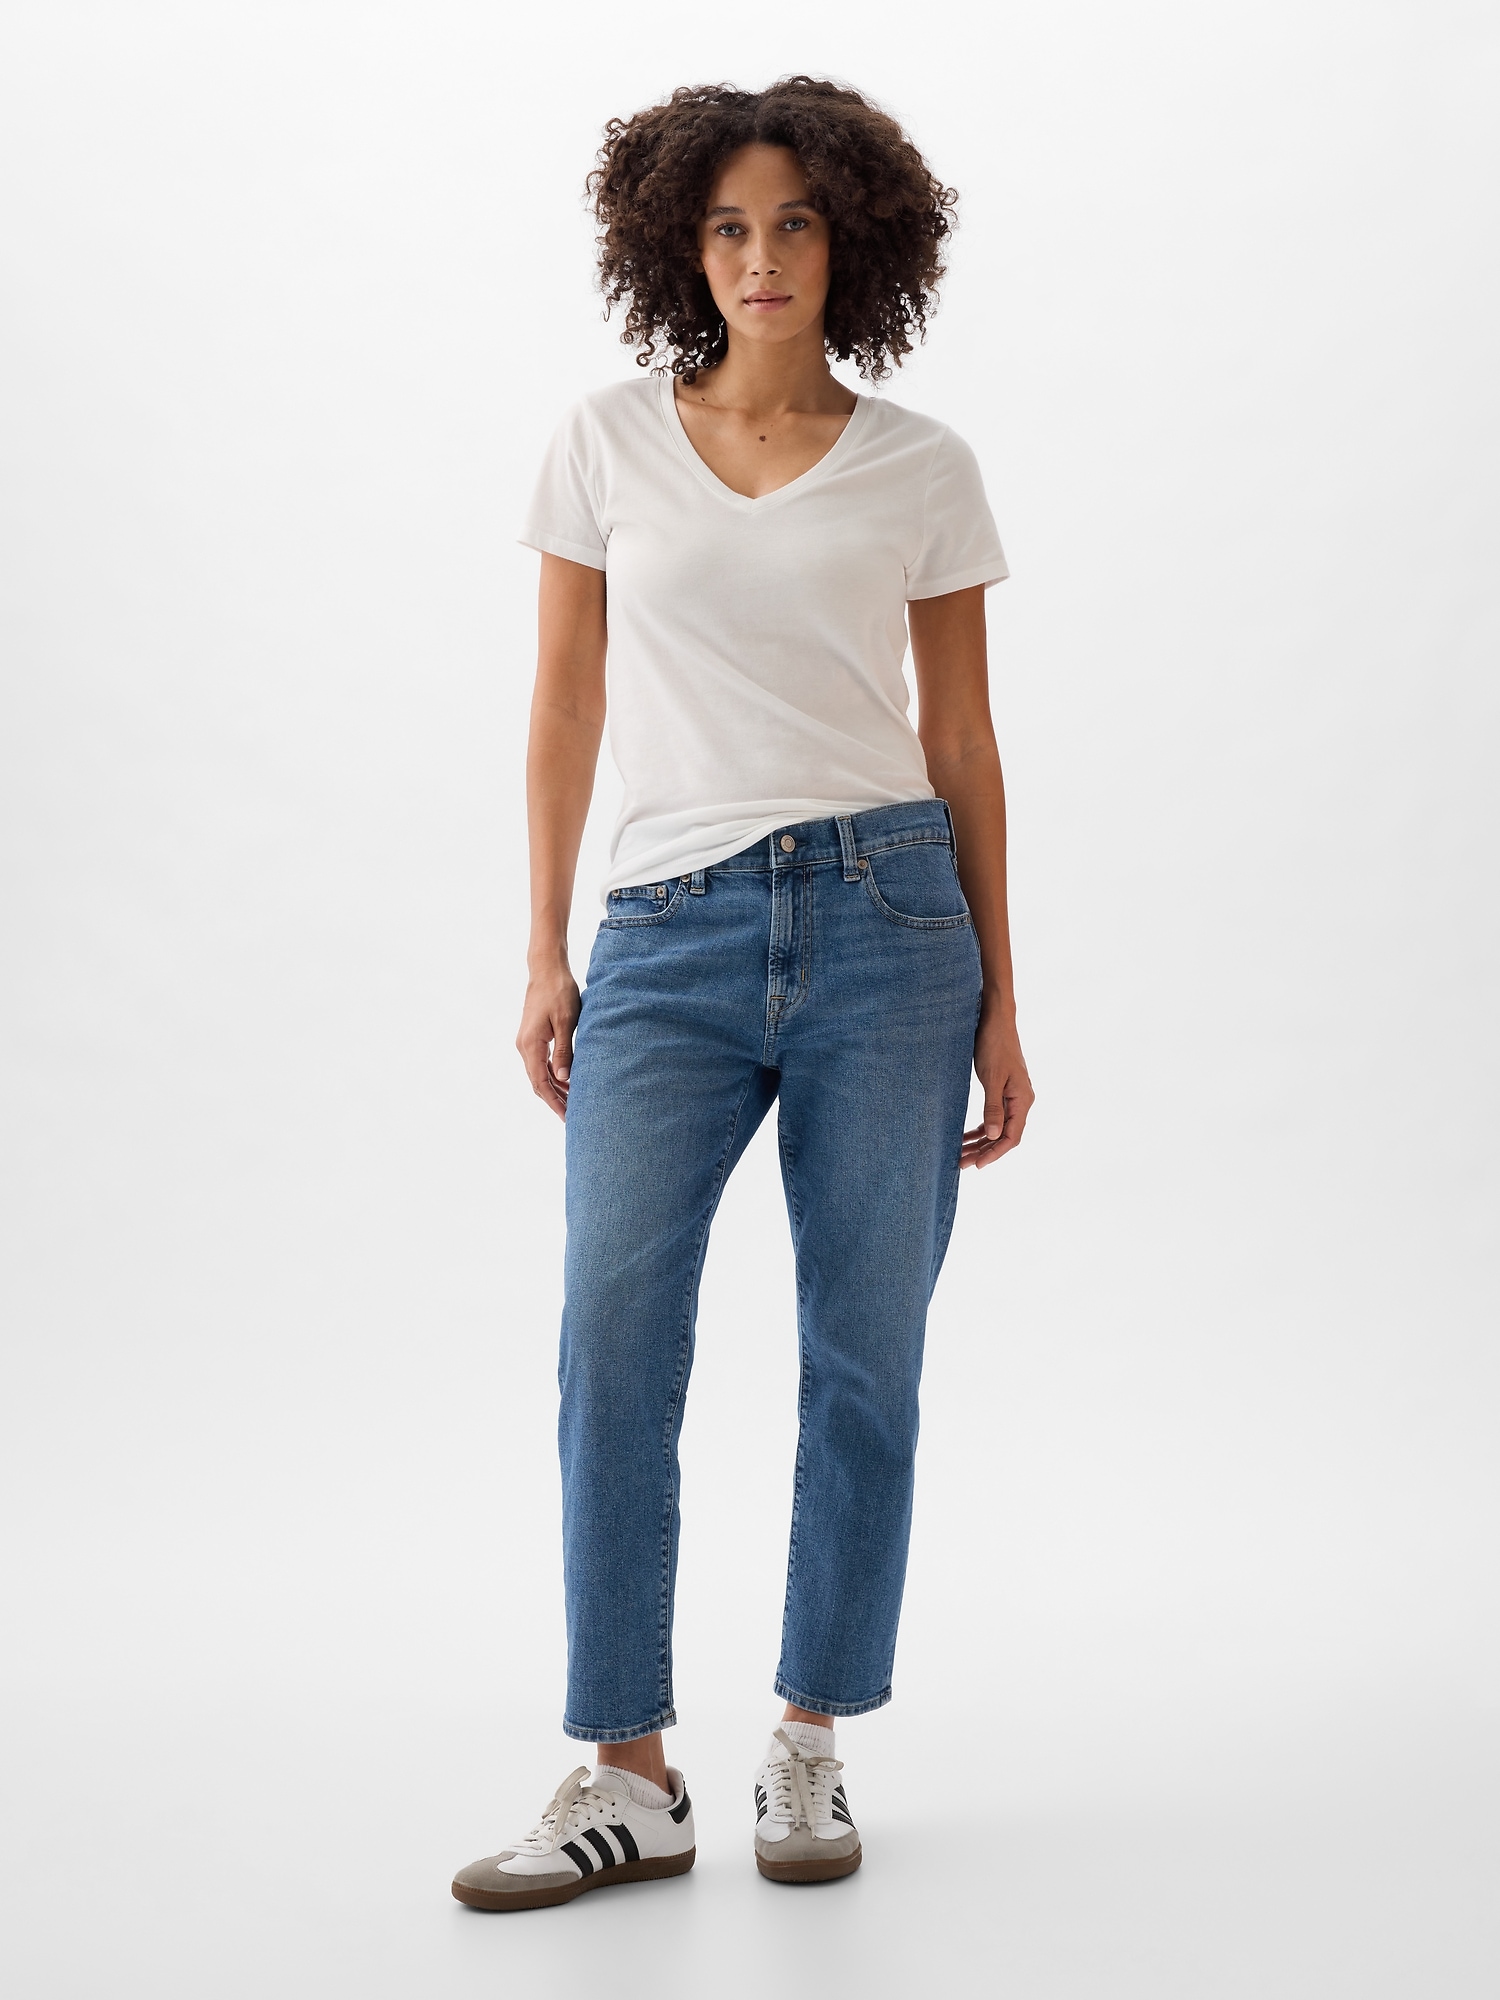 GAP Girlfriend Mid Rise Washwell Jeans Size 24 00P Rinsed Crop Ankle 683389